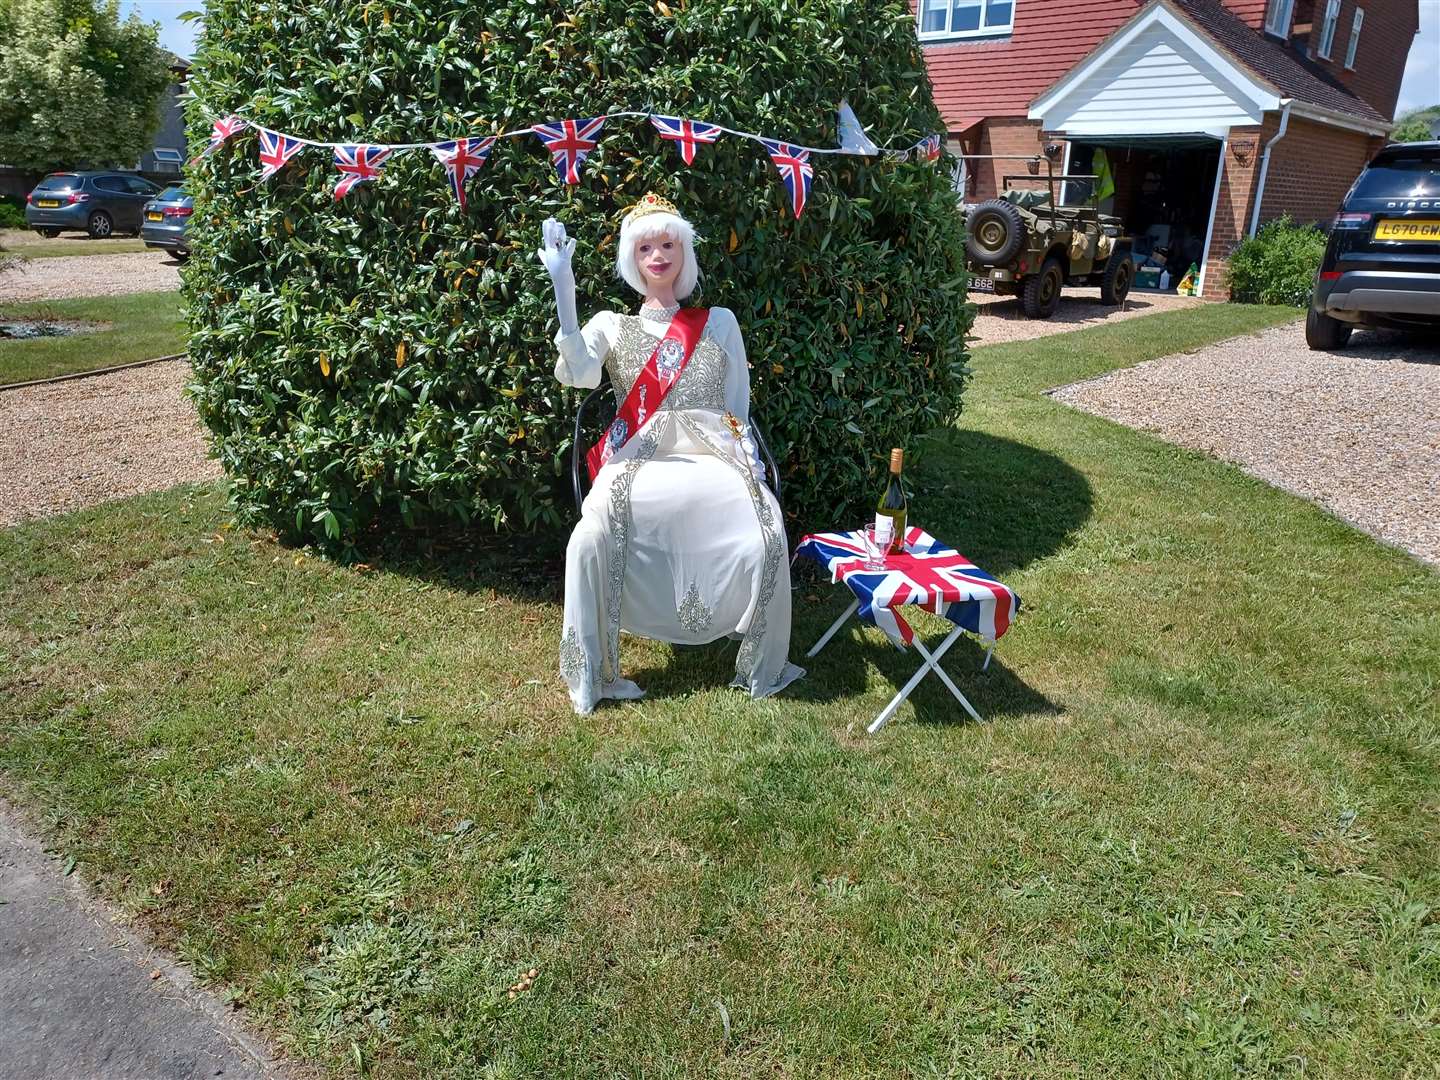 A regal wave from this queenly scarecrow